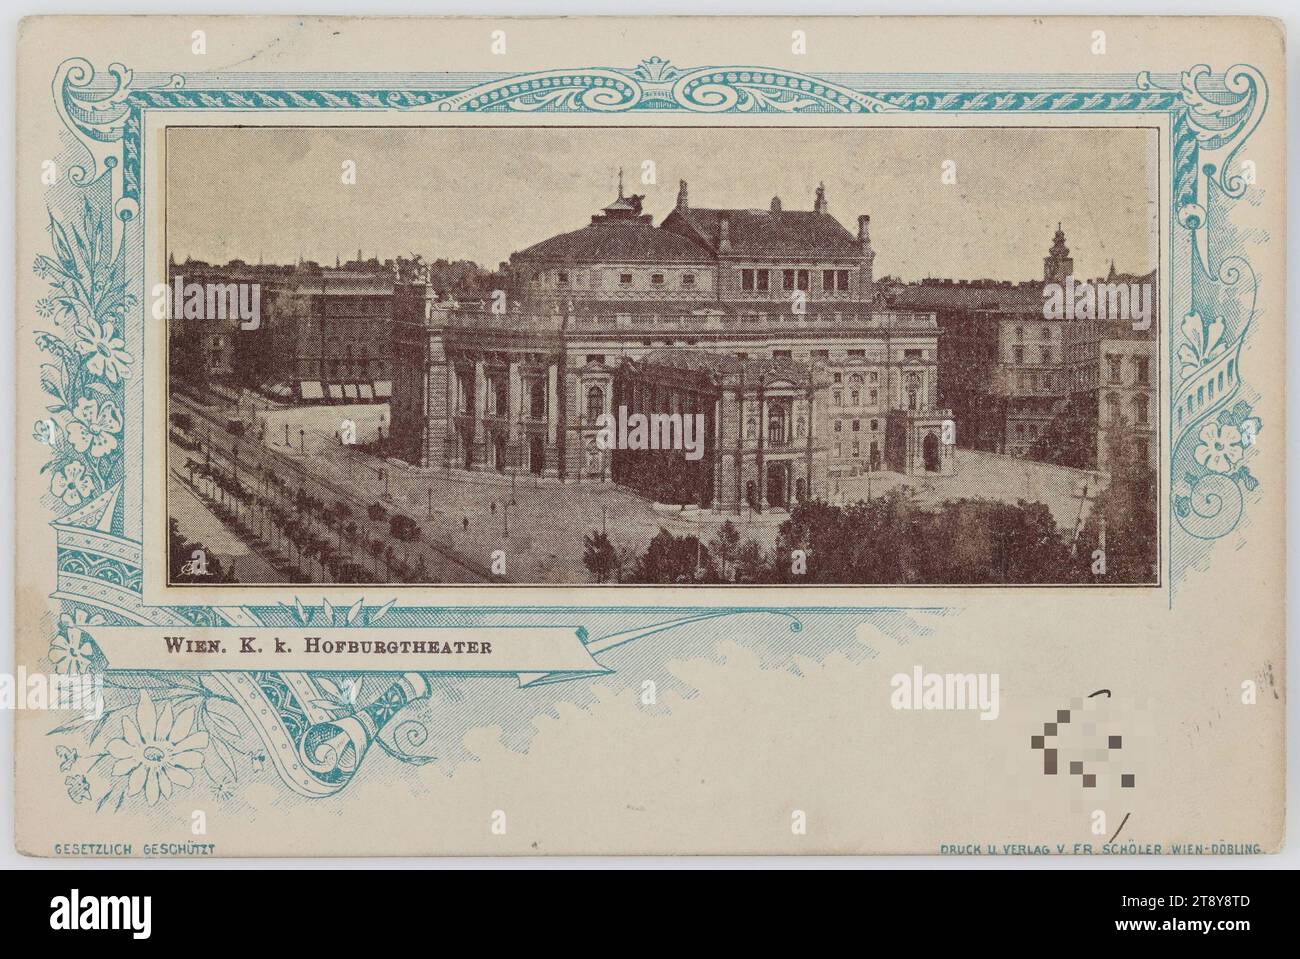 1st, Universitätsring 2 - Burgtheater, side view, picture postcard, Franz Schöler († 1911), producer, 1897, coated cardboard, halftone printing, sights, Ringstraße, theater, 1st district: inner city, theater (building), Burgtheater, Universitätsring, The Vienna Collection Stock Photo